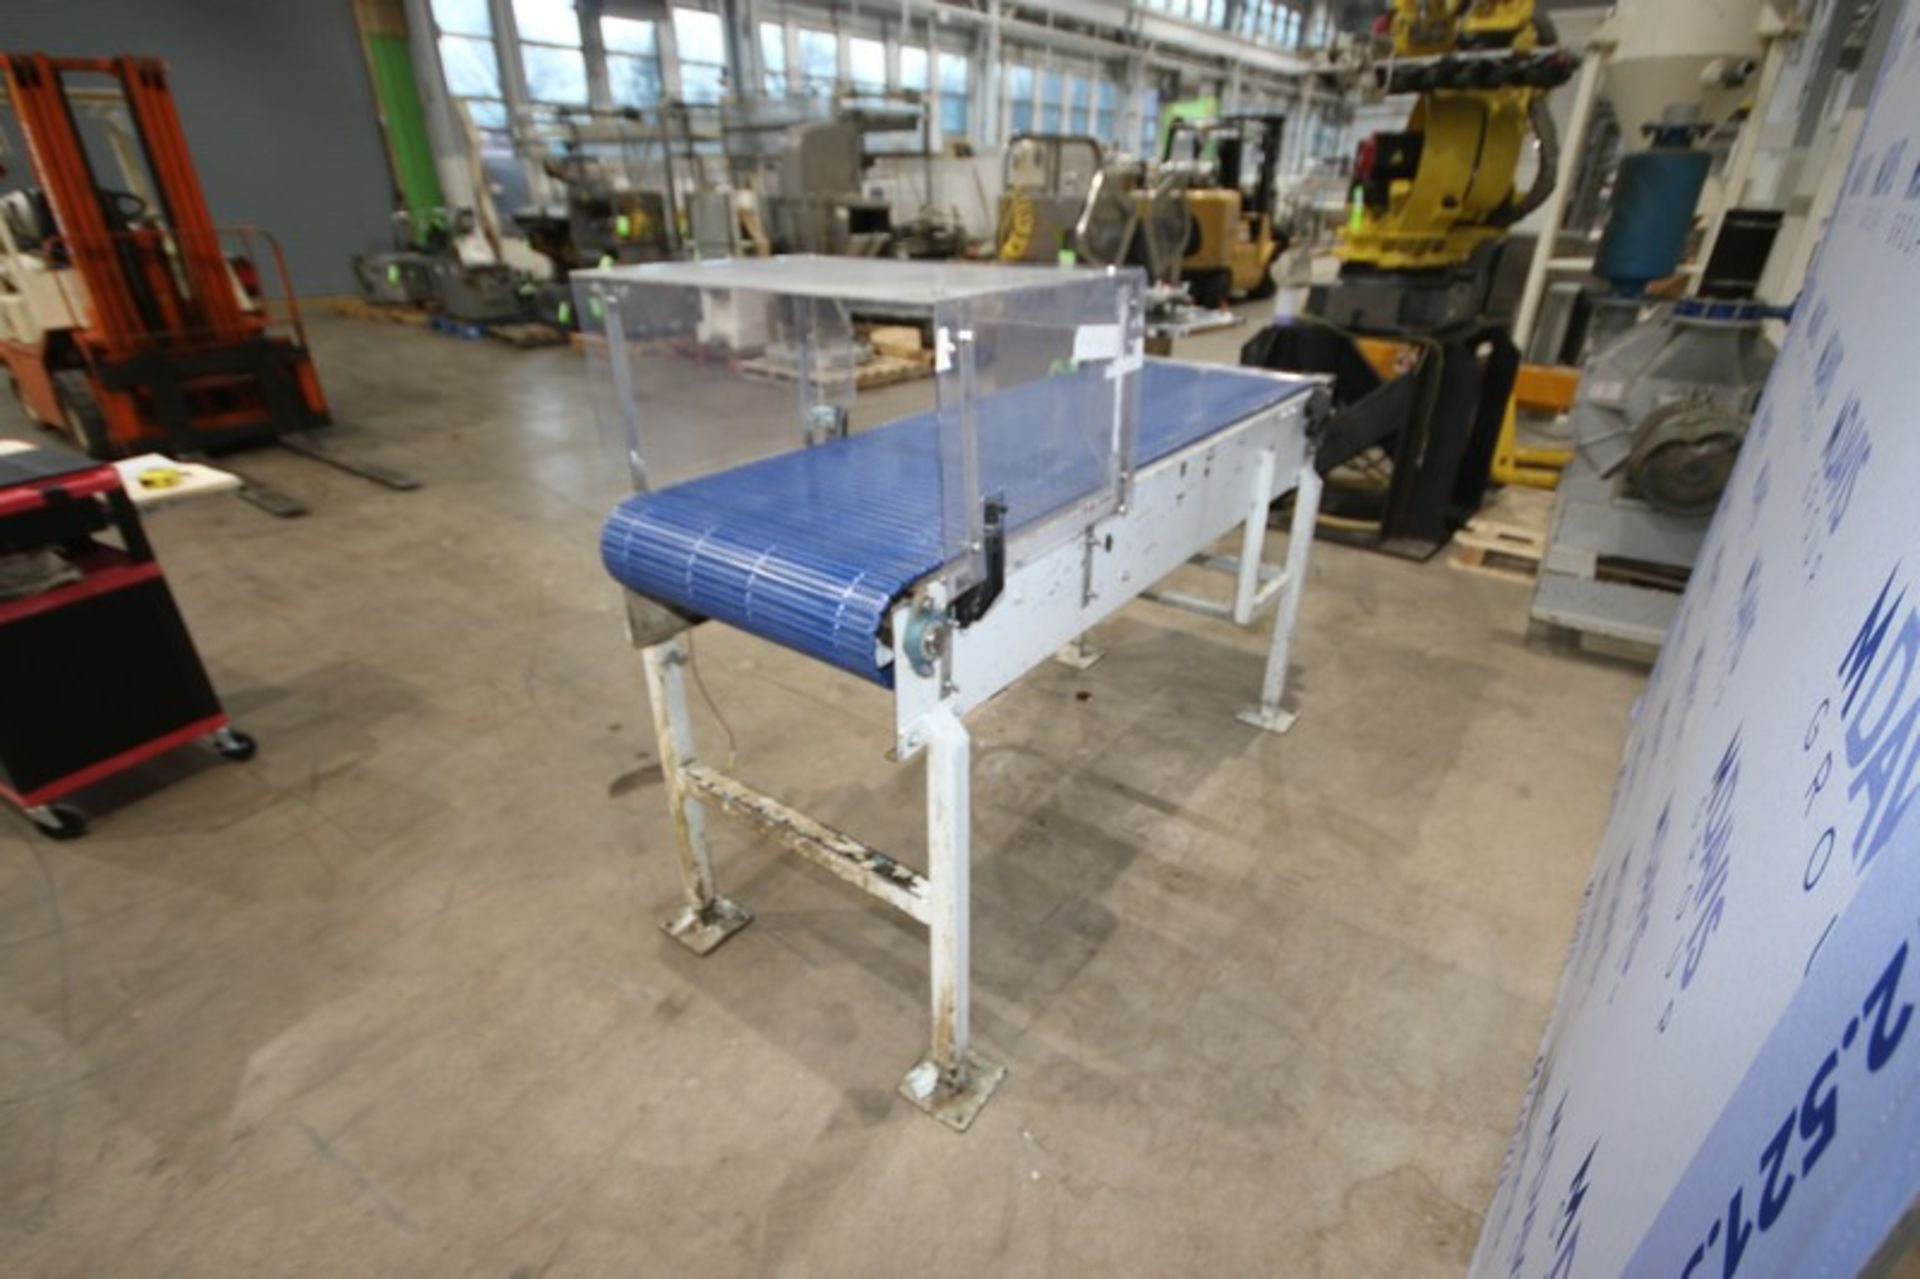 Straight Section of Conveyor, with Aprox. 24" W Blue Interlock Belt, Overall Length of Conveyor: - Image 4 of 7